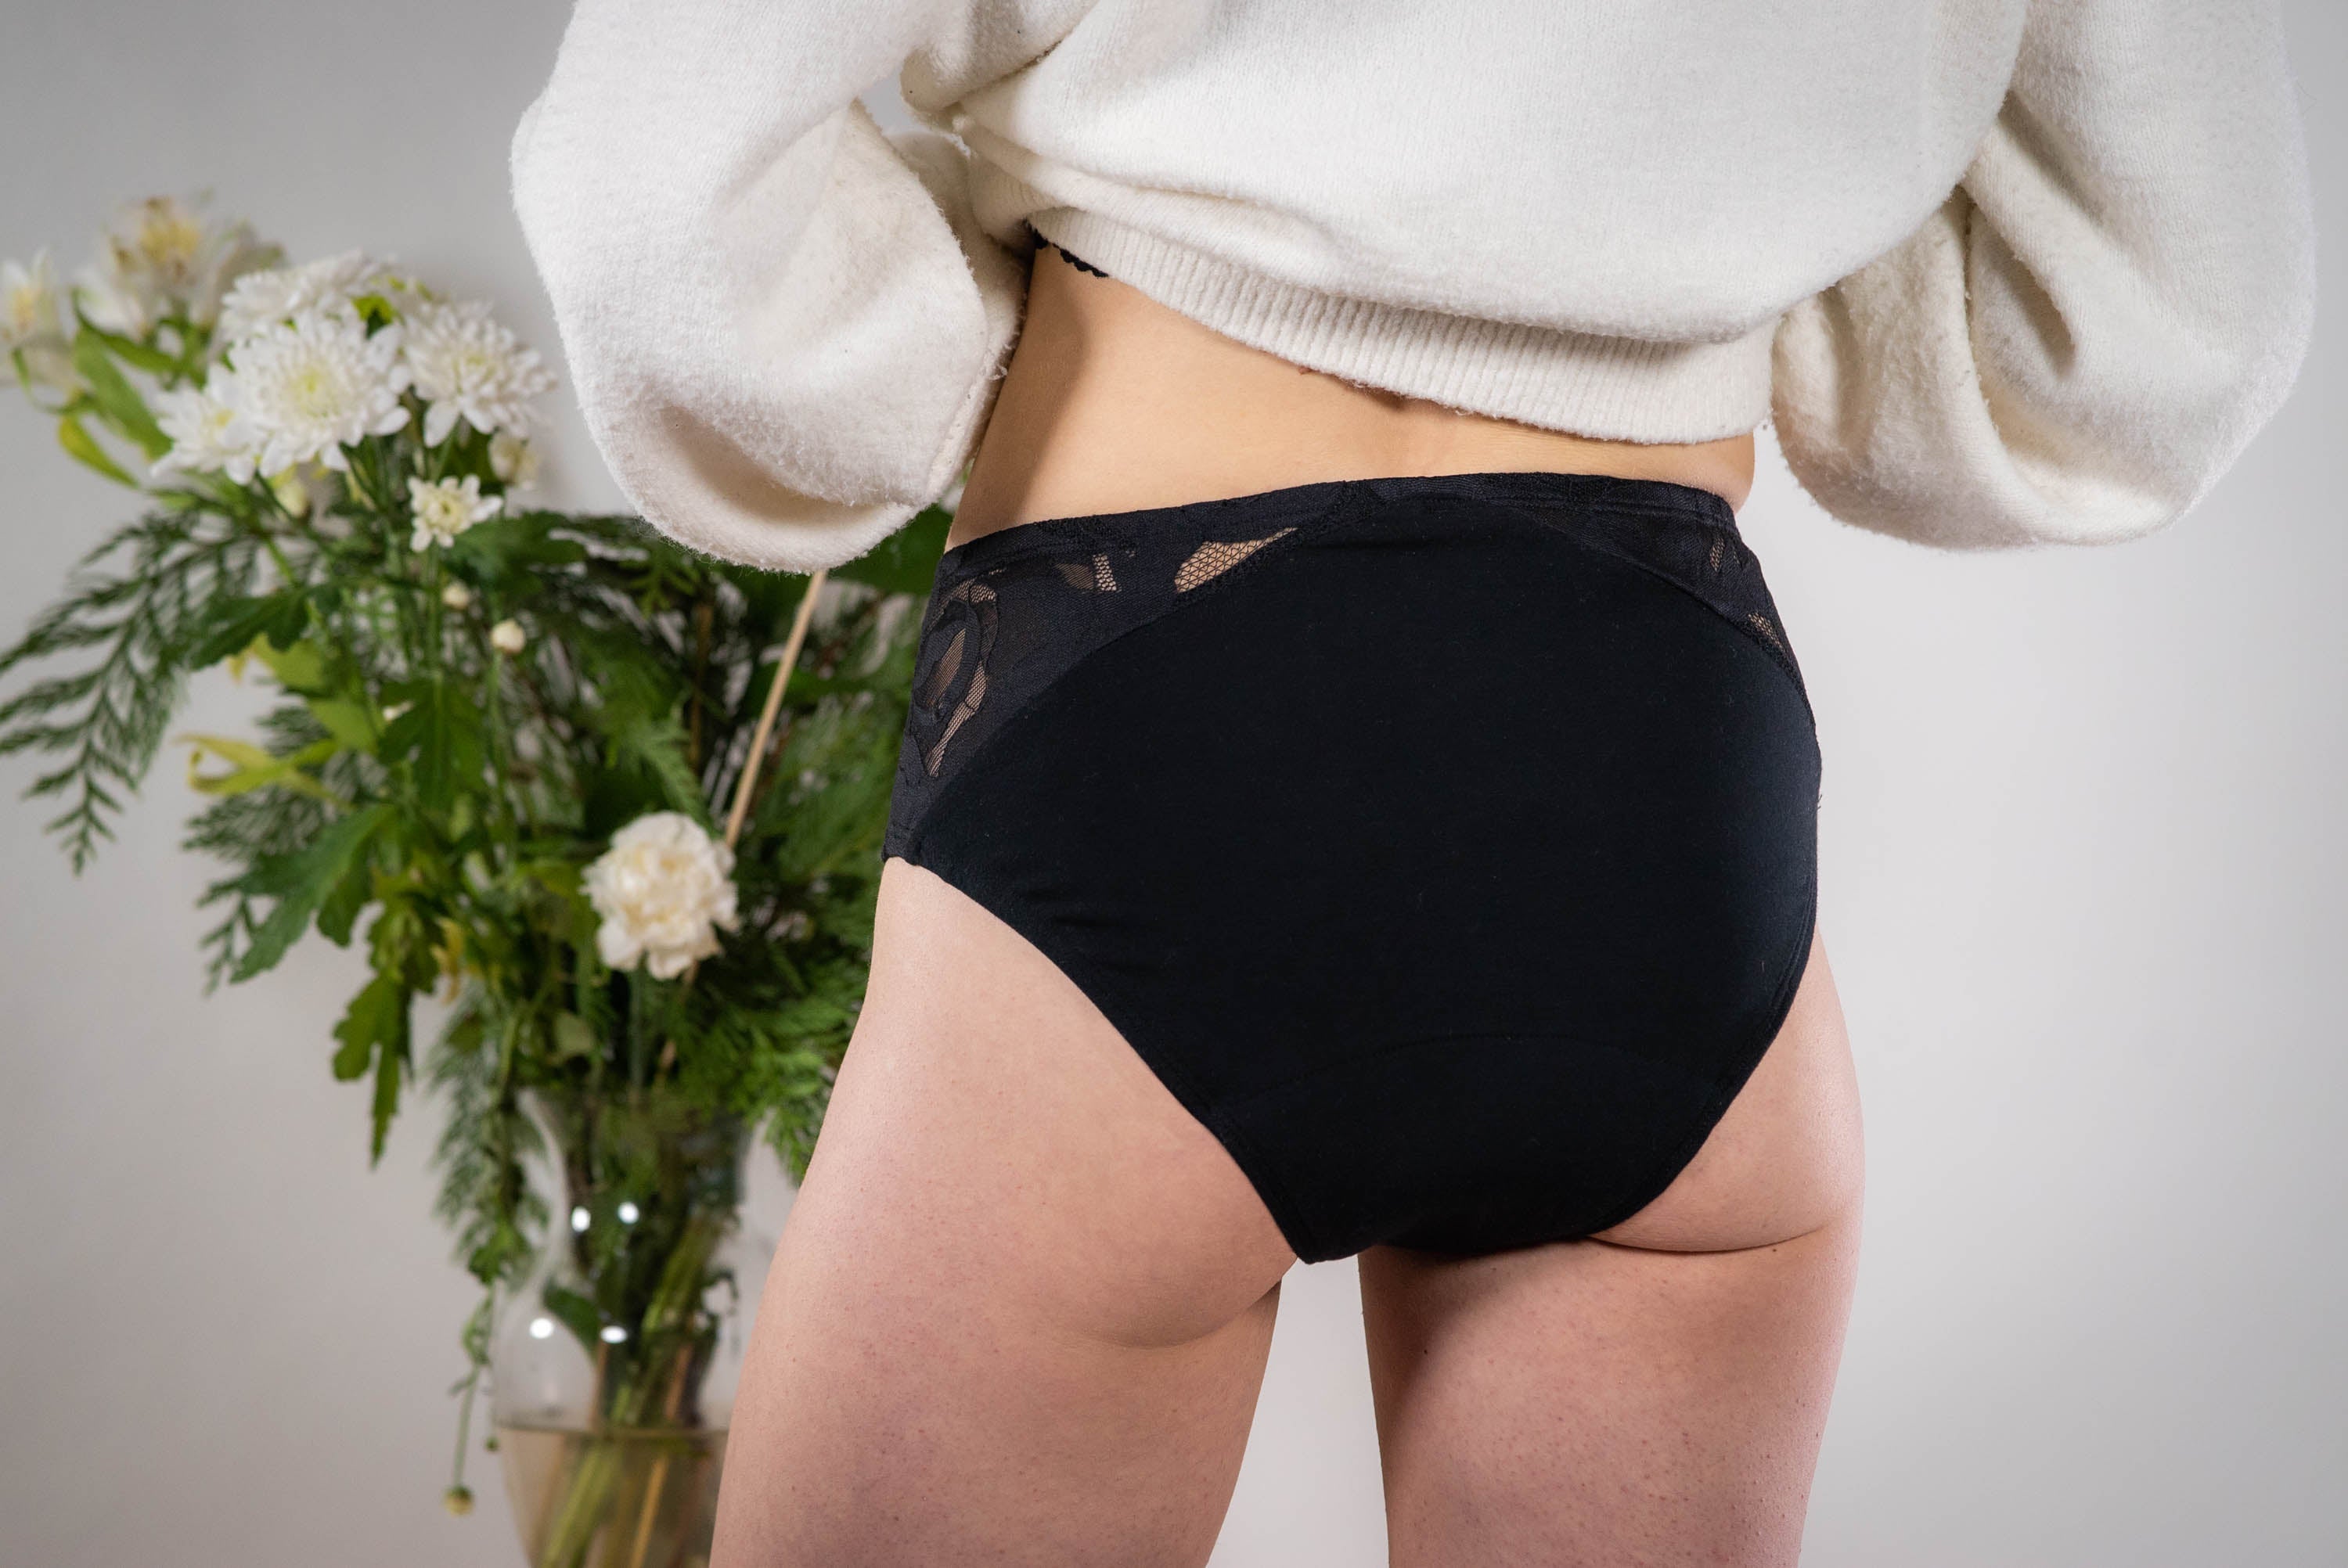 Rosaseven: Game-changing period underwear brand in Vancouver